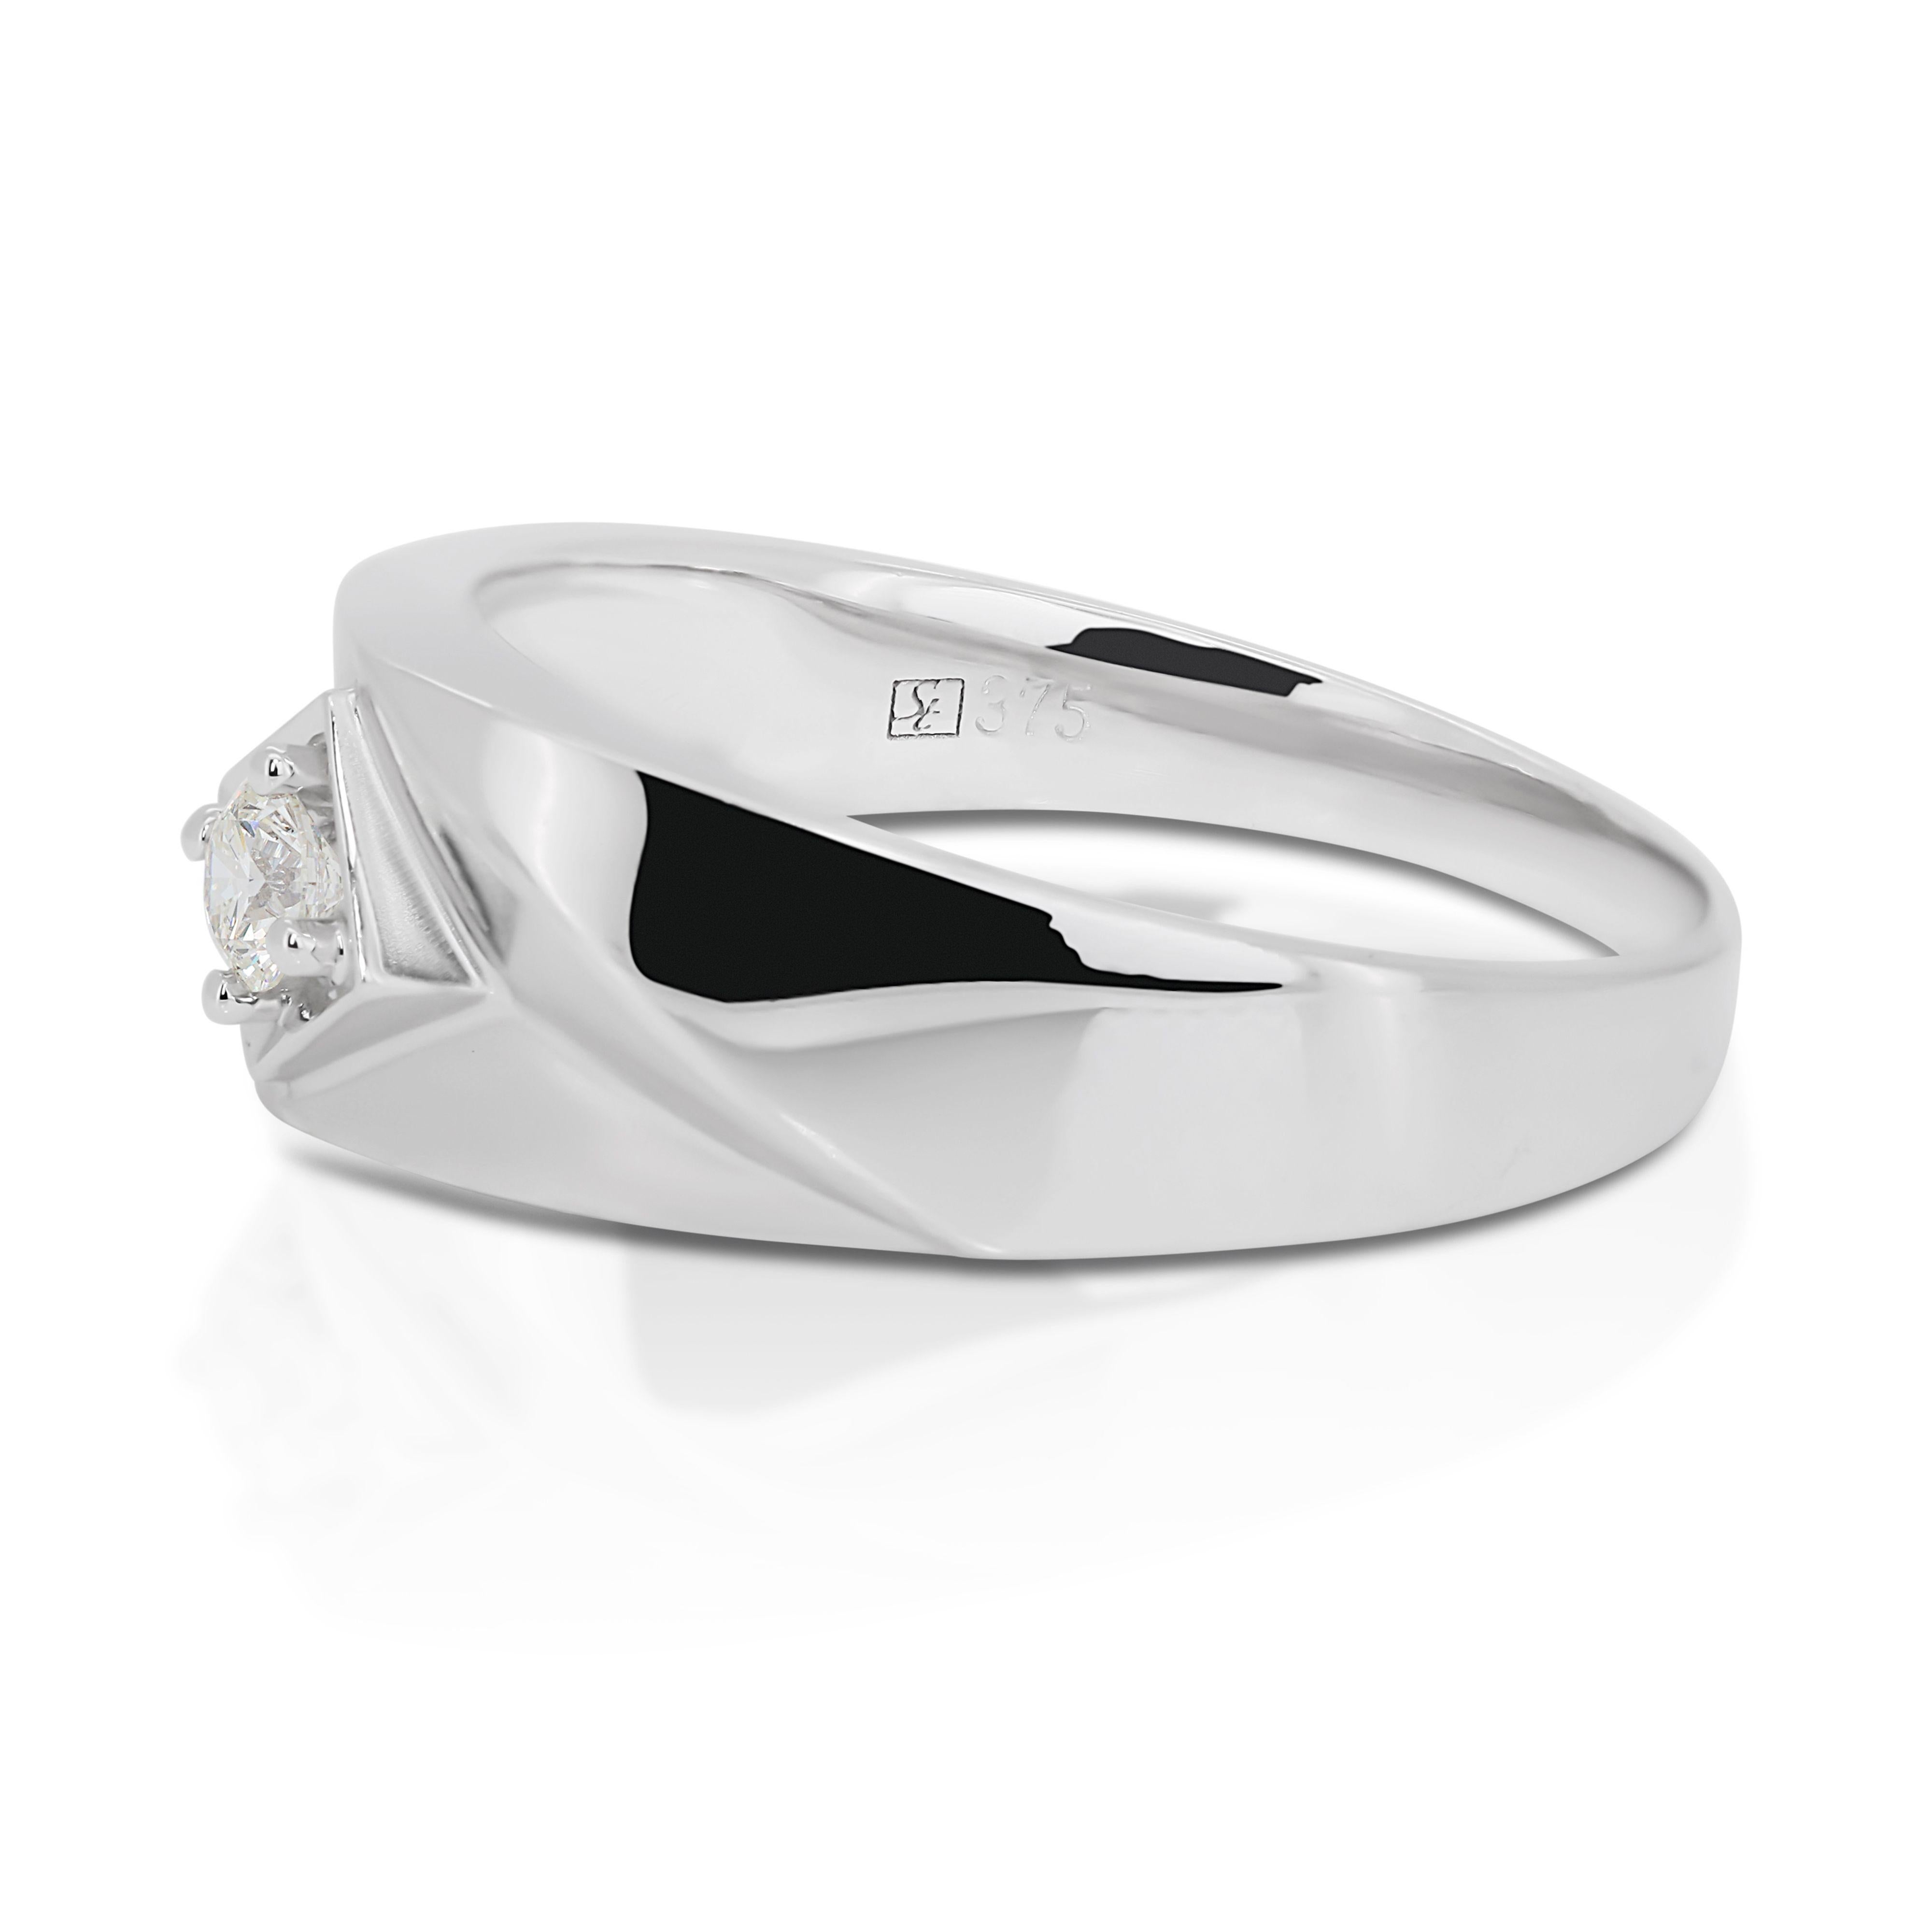 Women's Sophisticated 9K White Gold Ring with 0.15ct Natural Diamond For Sale